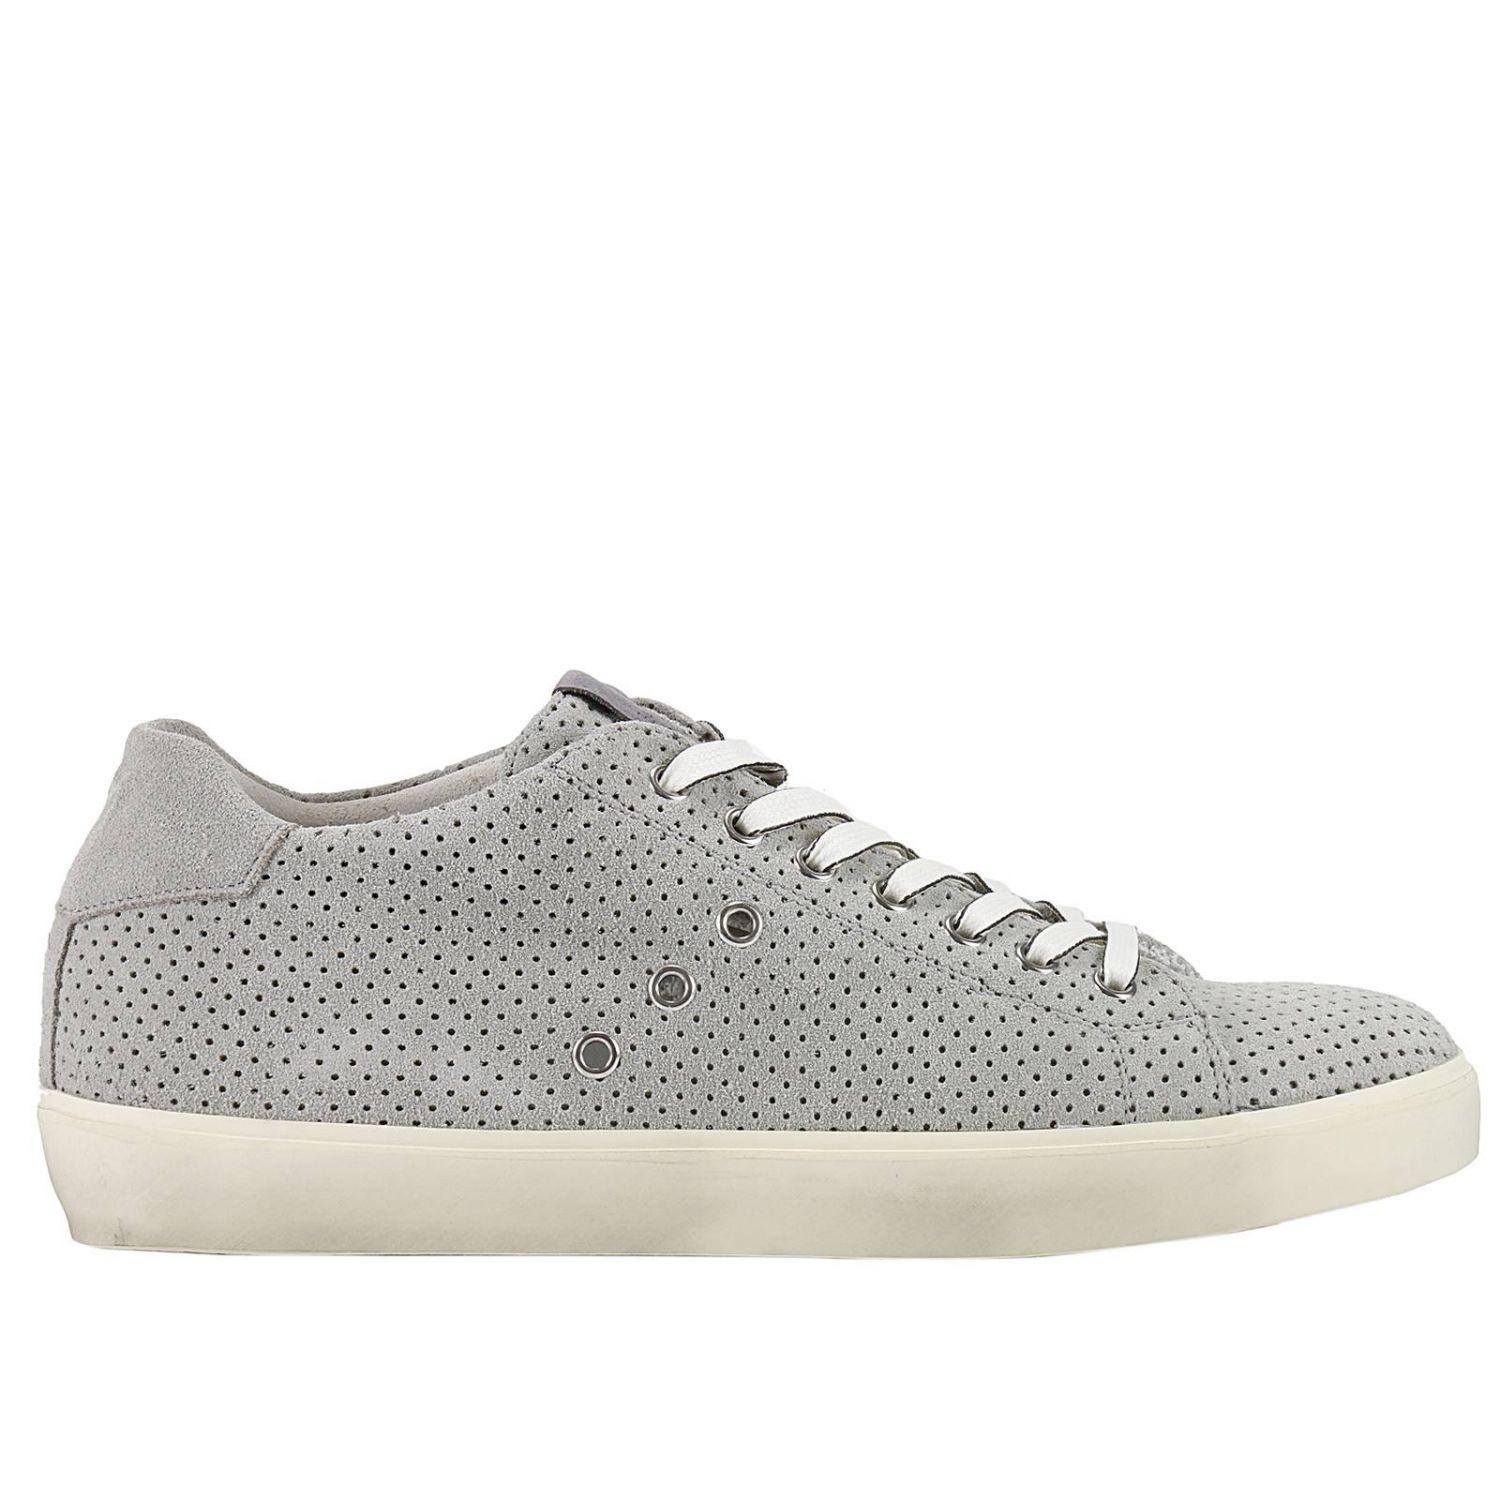 Lyst - Leather Crown Sneakers Shoes Men in Gray for Men